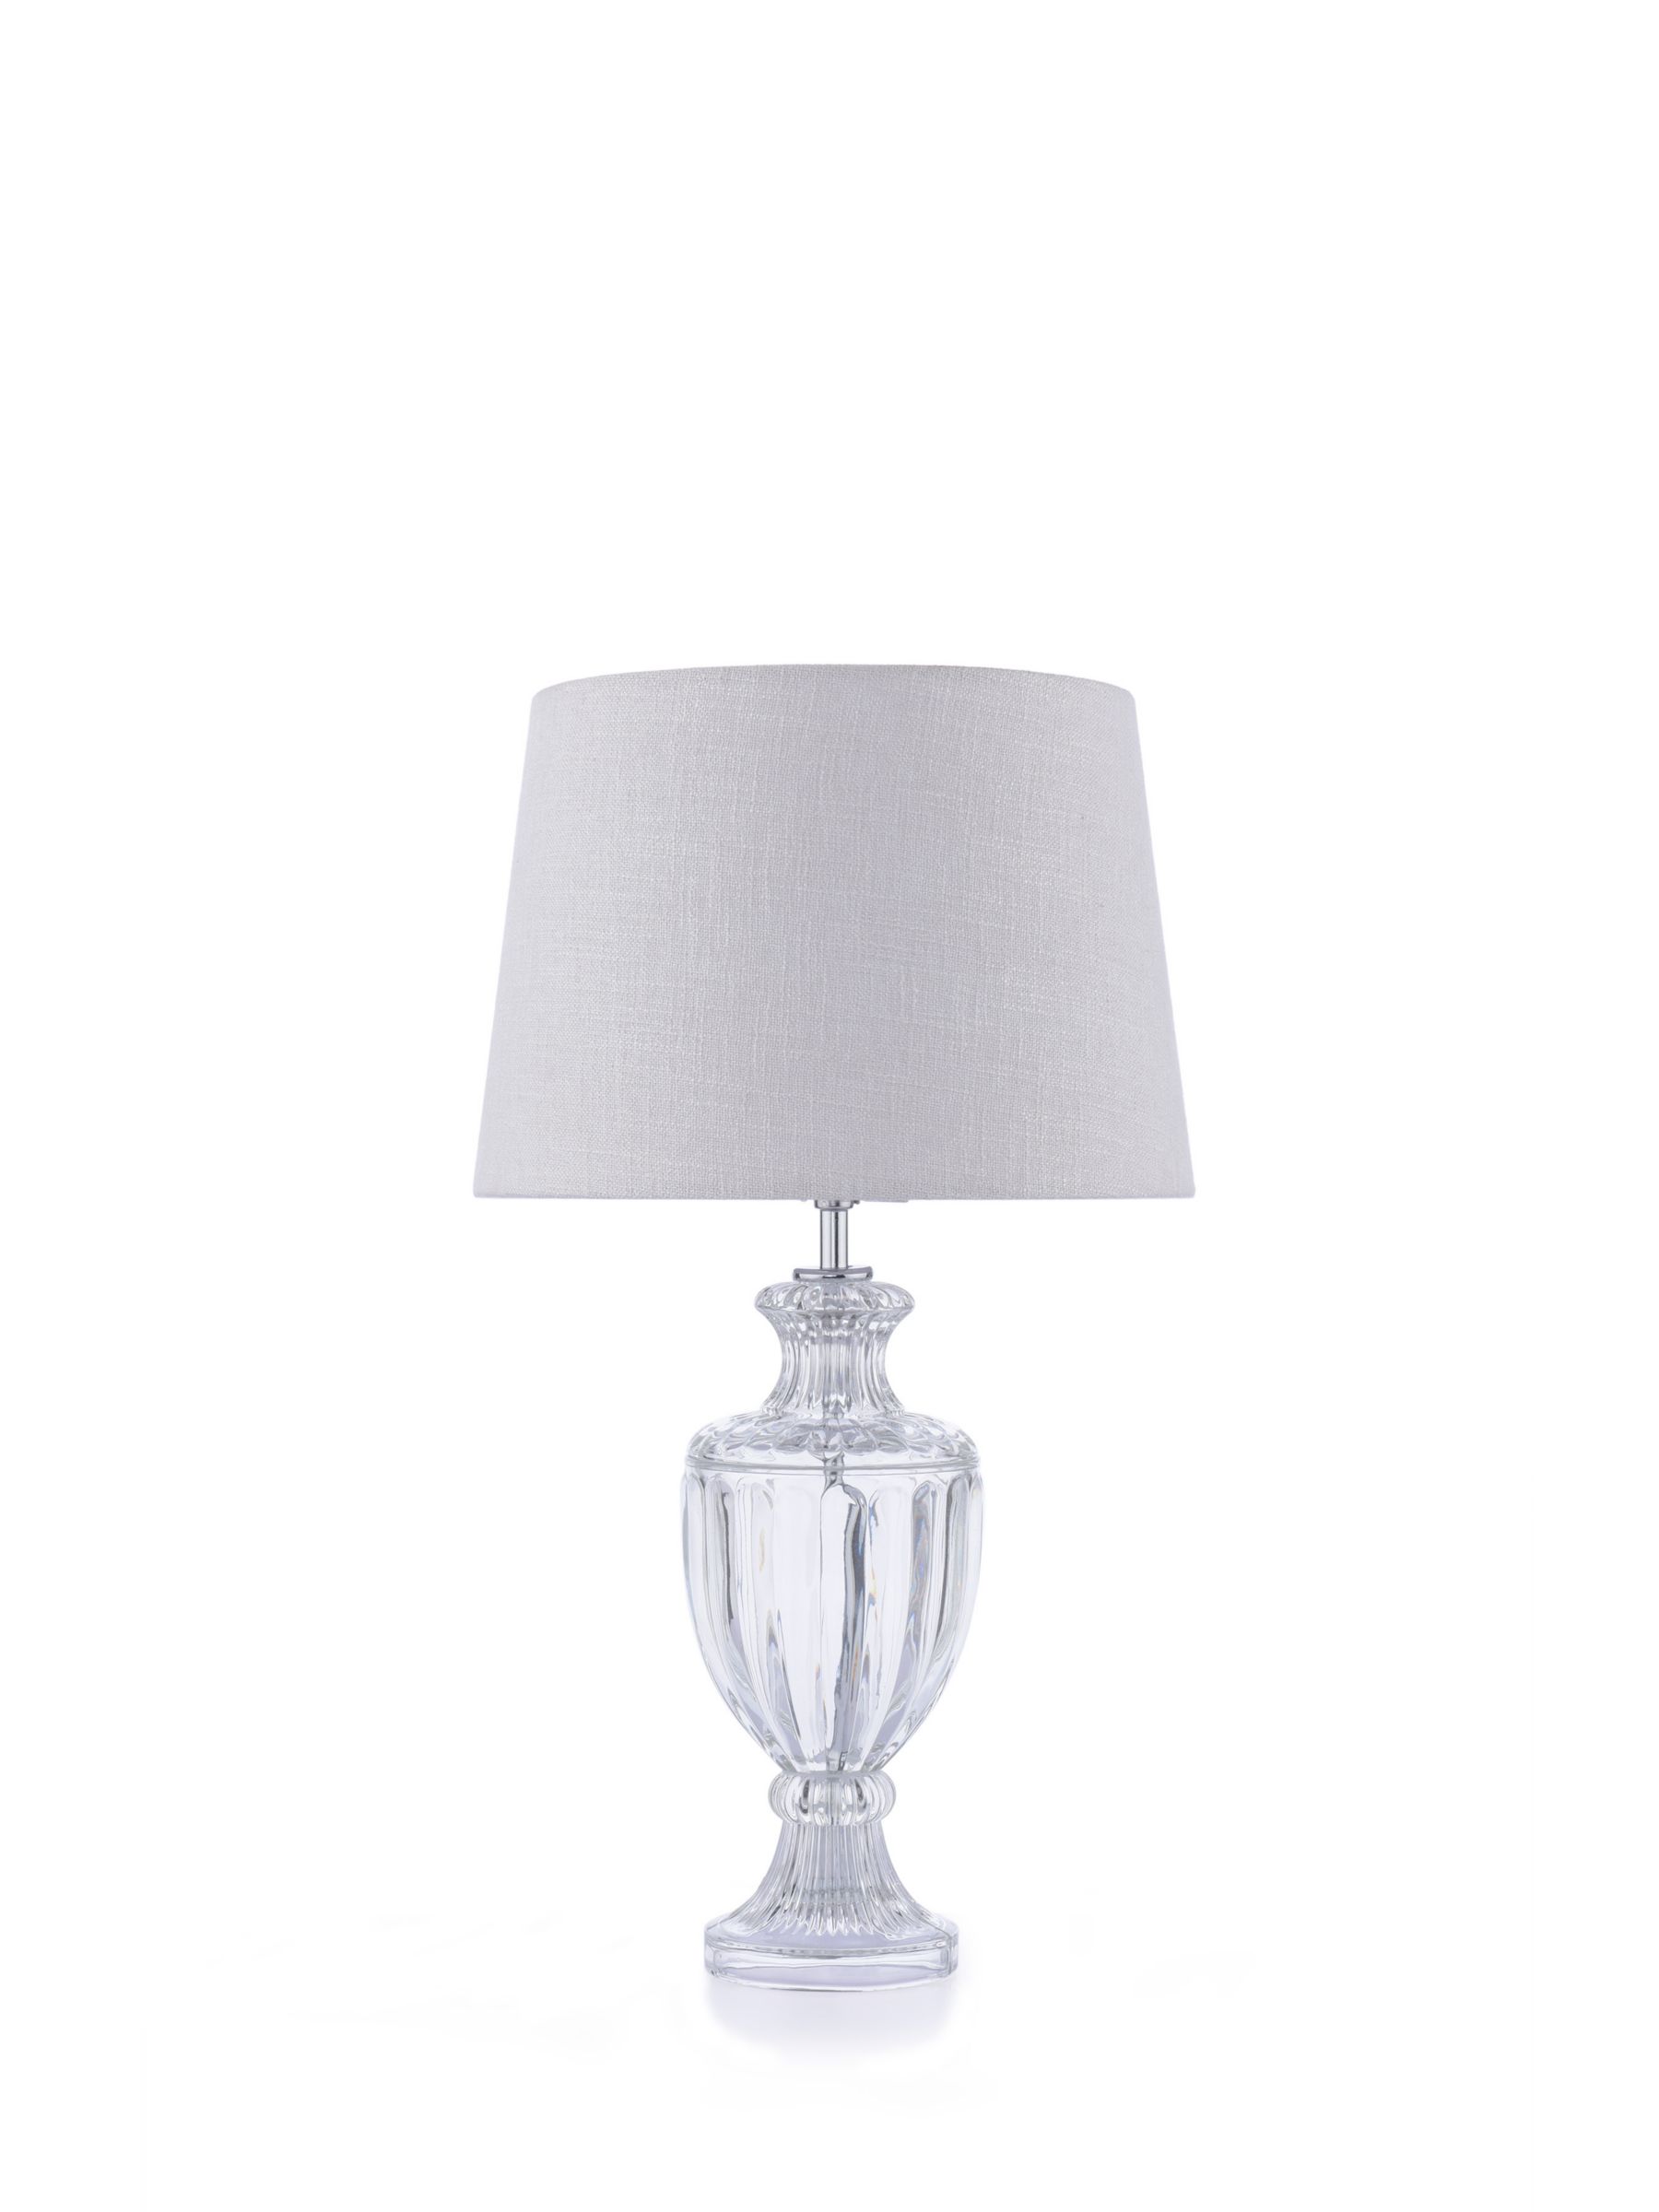 Photo of Laura ashley meredith petite ribbed glass table lamp clear